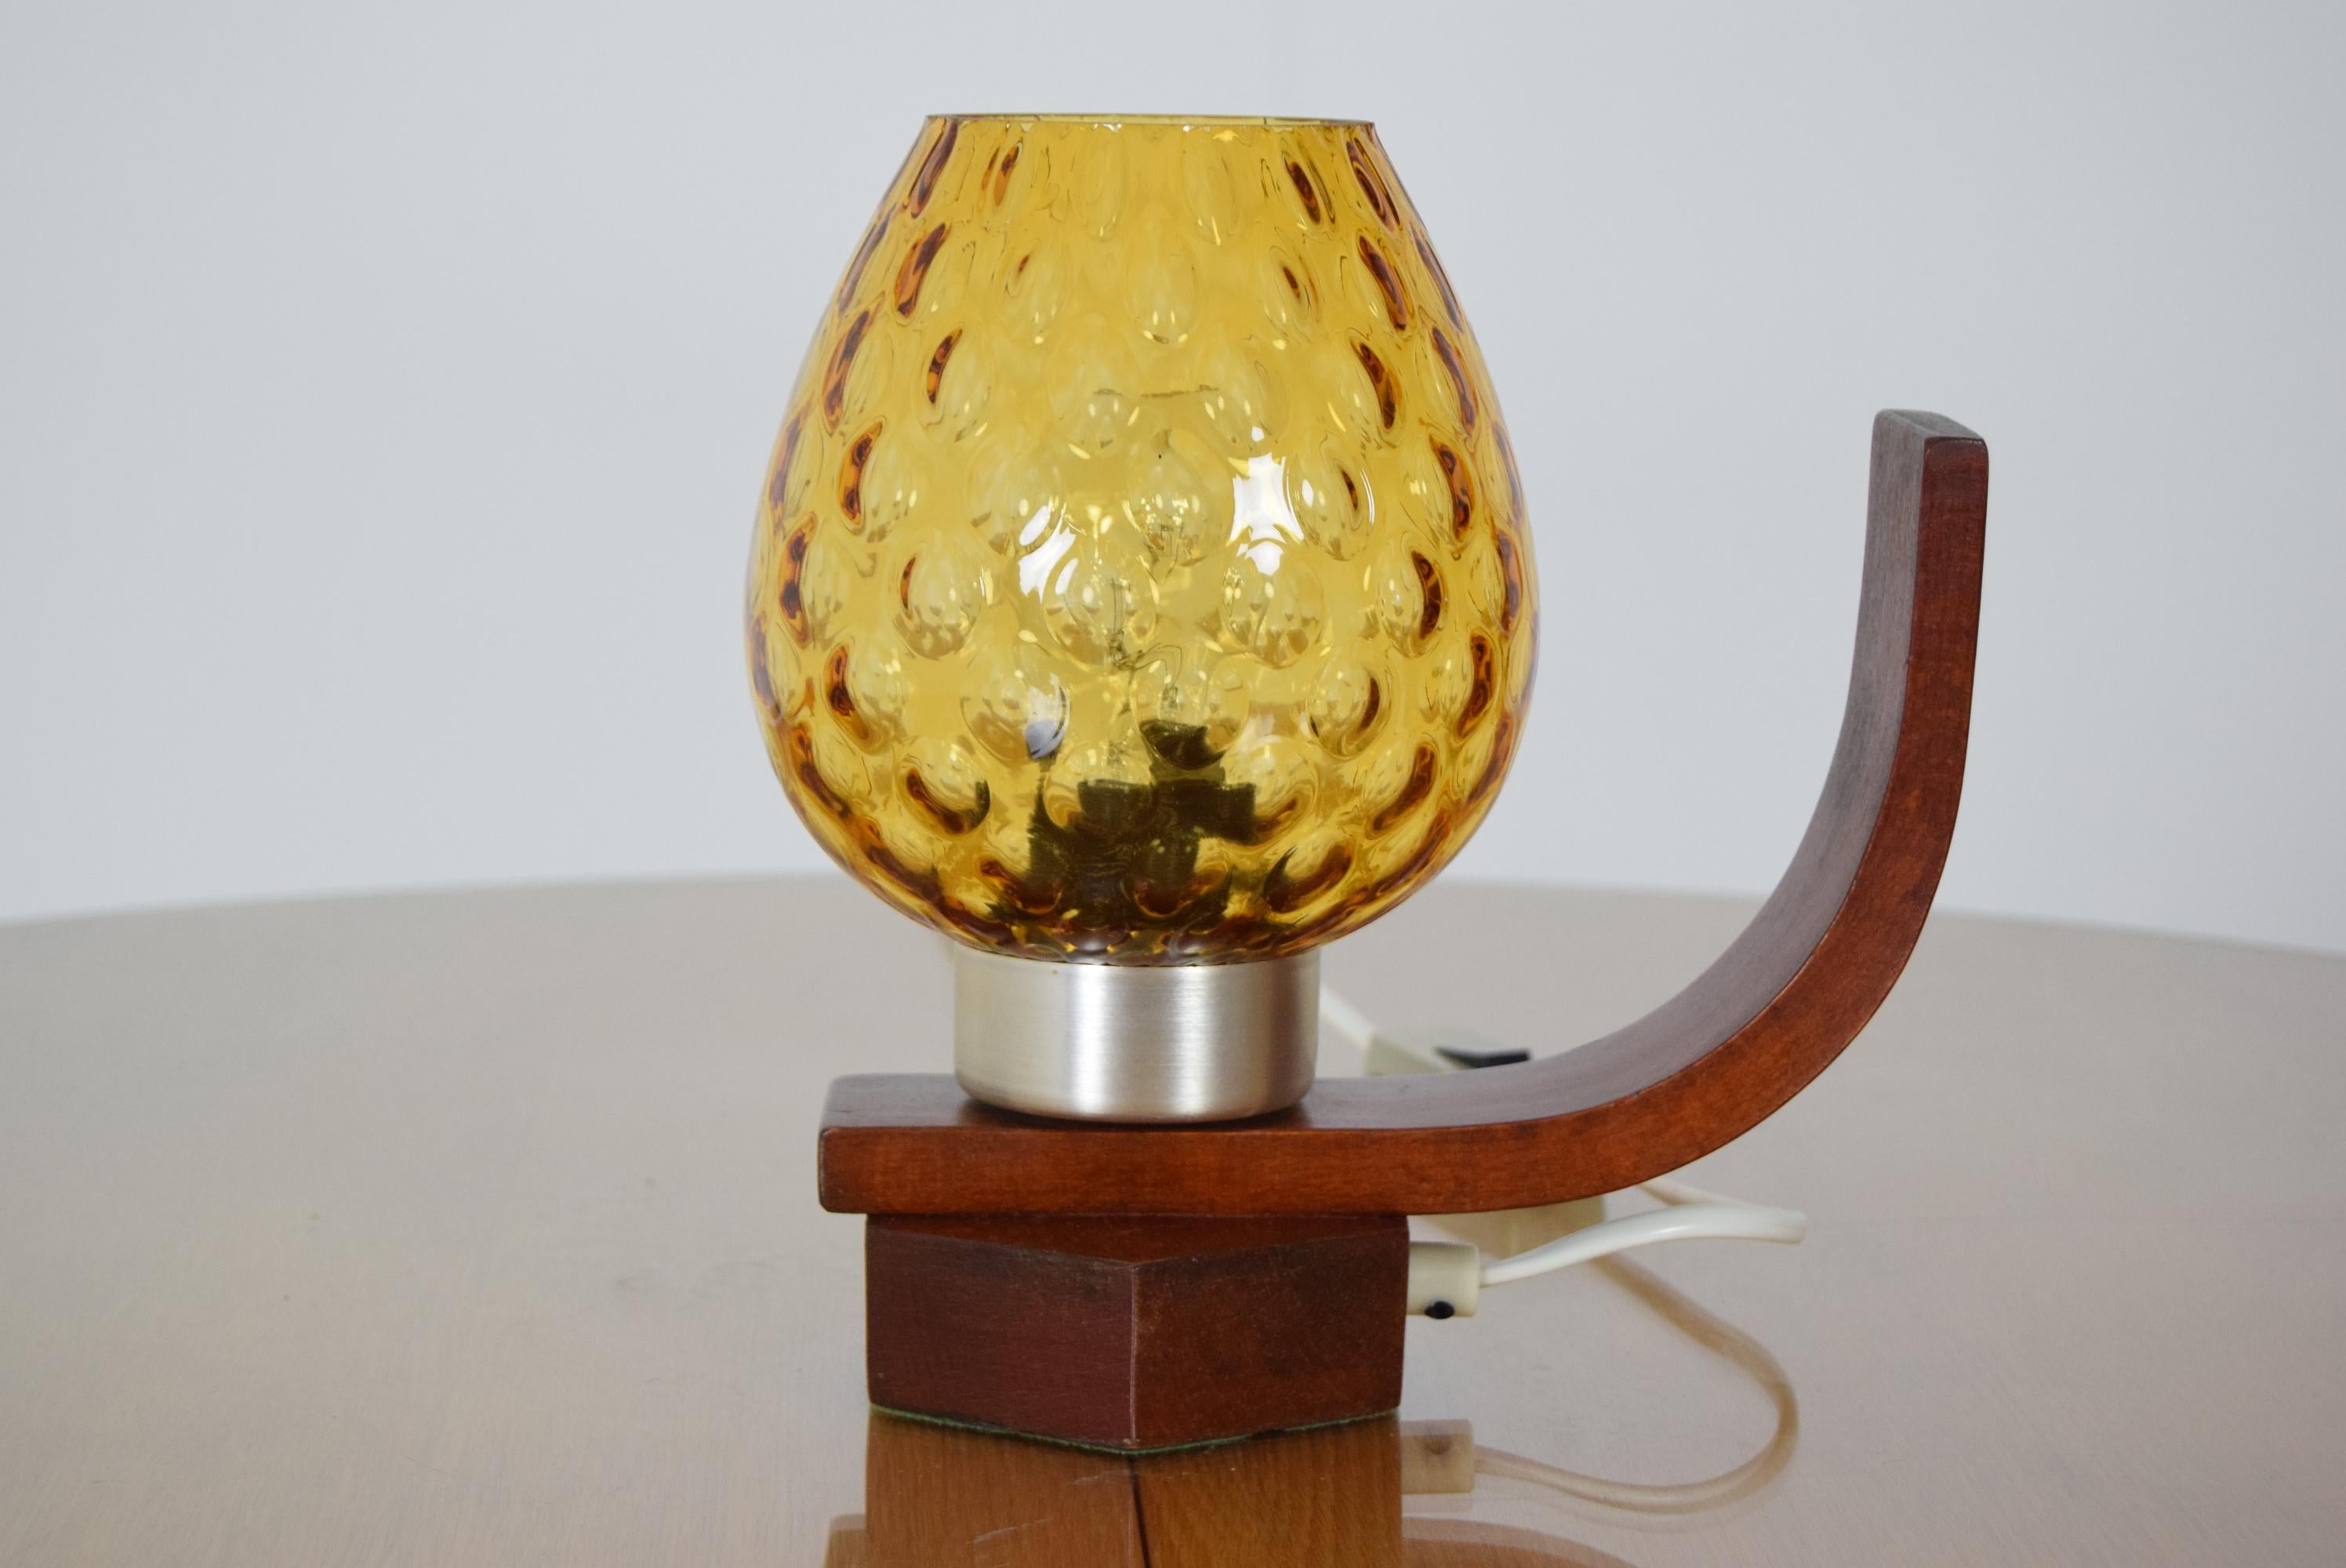 Made in Czechoslovakia
Made of wood, glass
1x E27 or E26 socket
Re-polished
Fully functional
Good original condition.